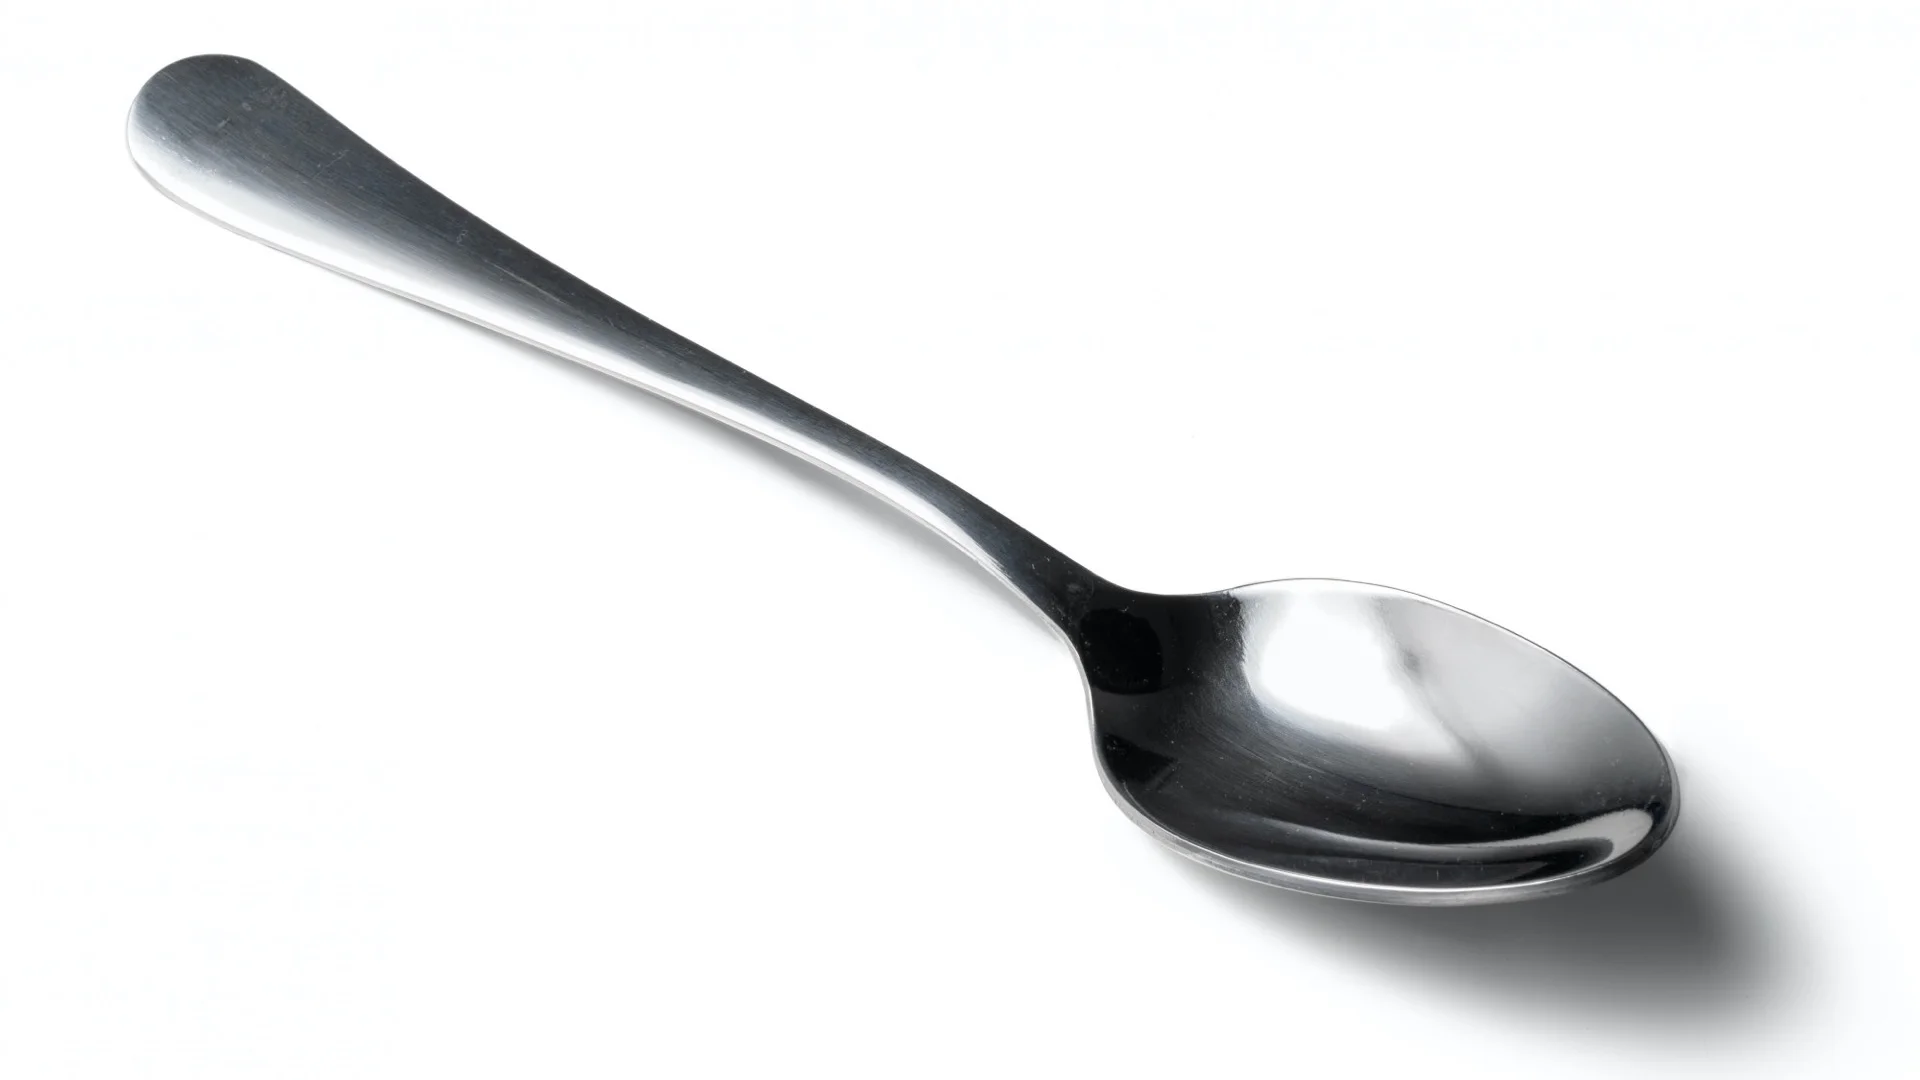 What is a US Tablespoon